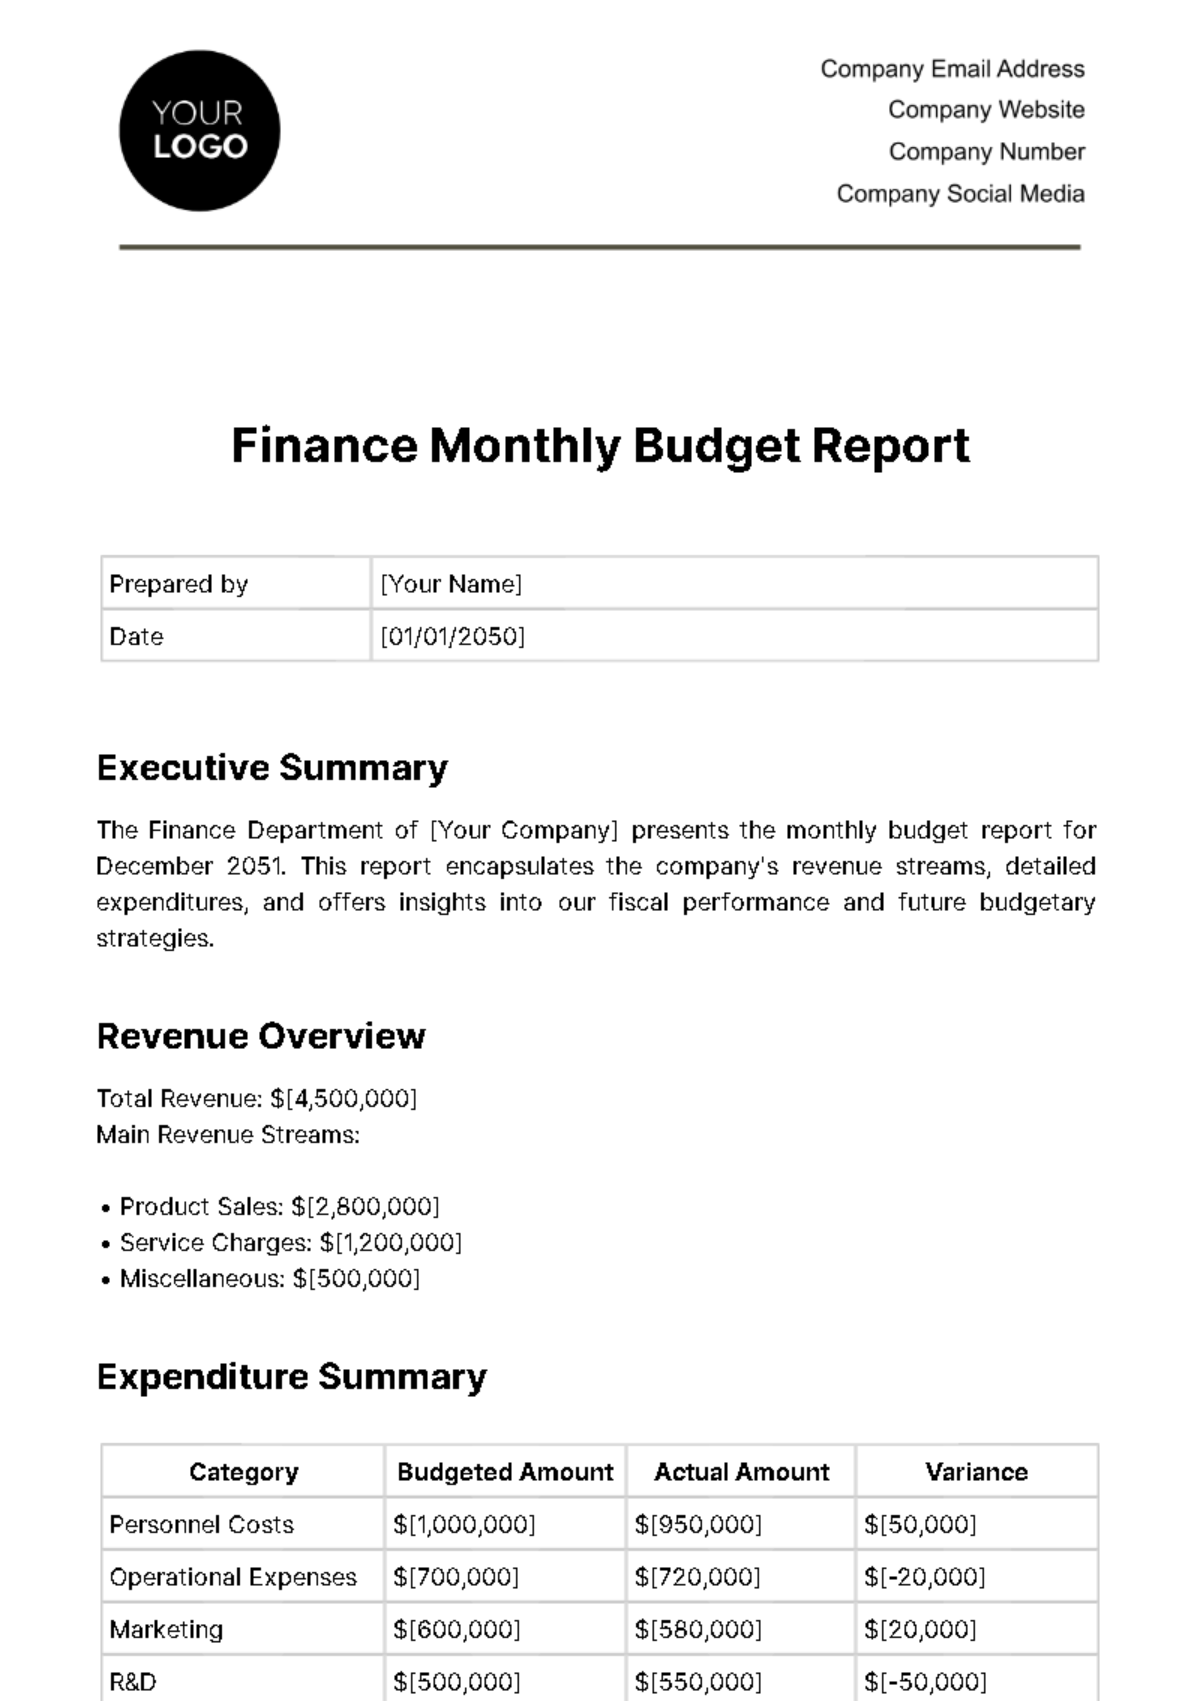 Free Finance Monthly Budget Report Template